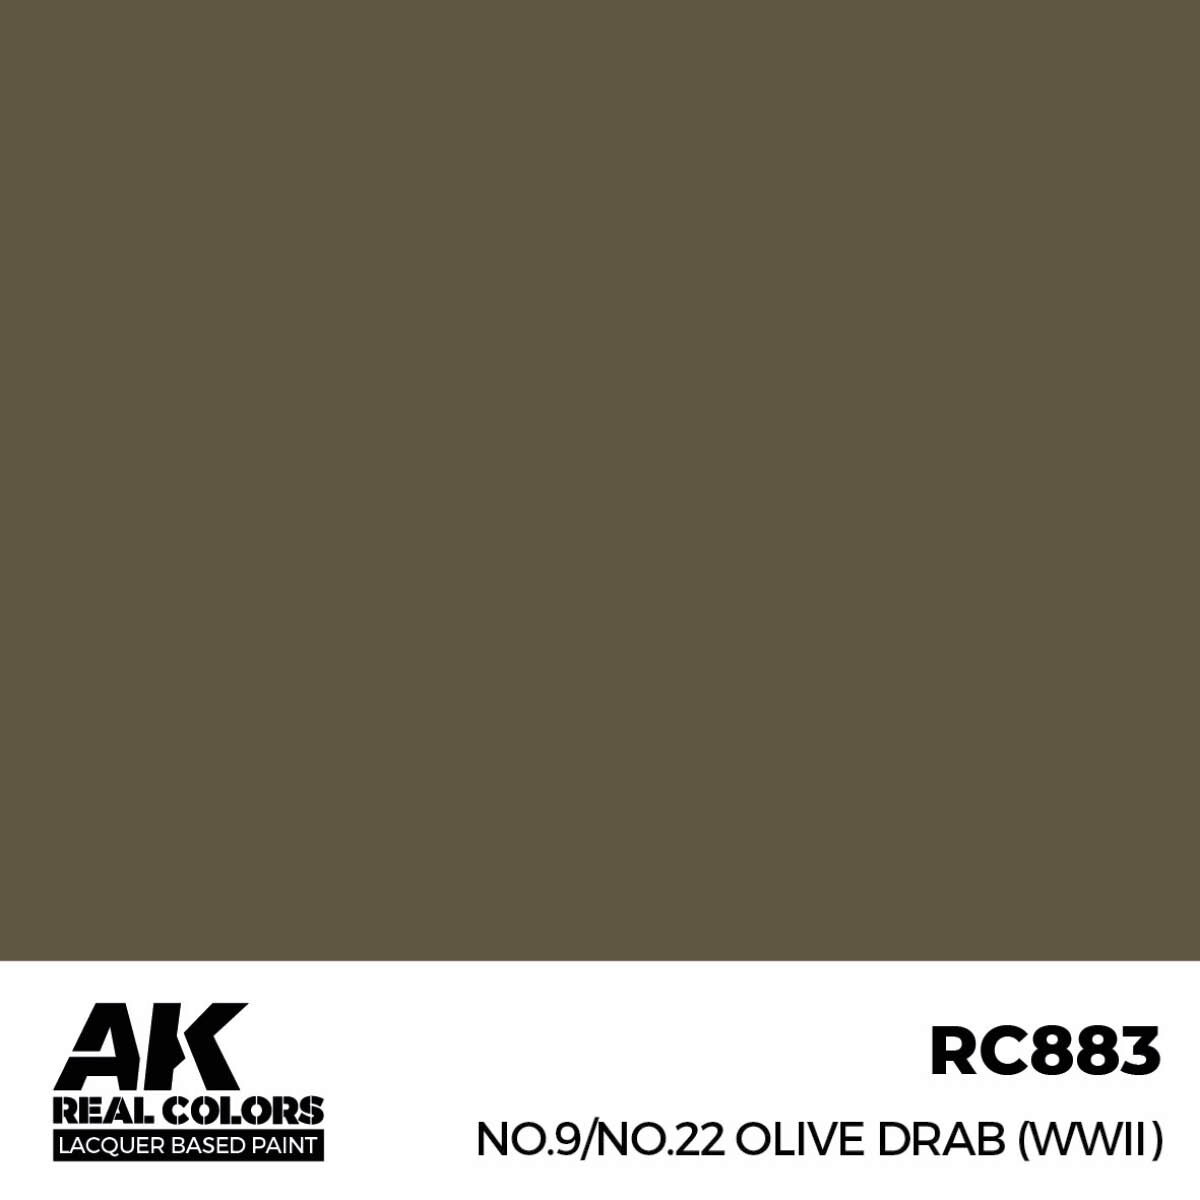 AK RC883 Real Colors No.9/No.22 Olive Drab (WWII) 17 ml.